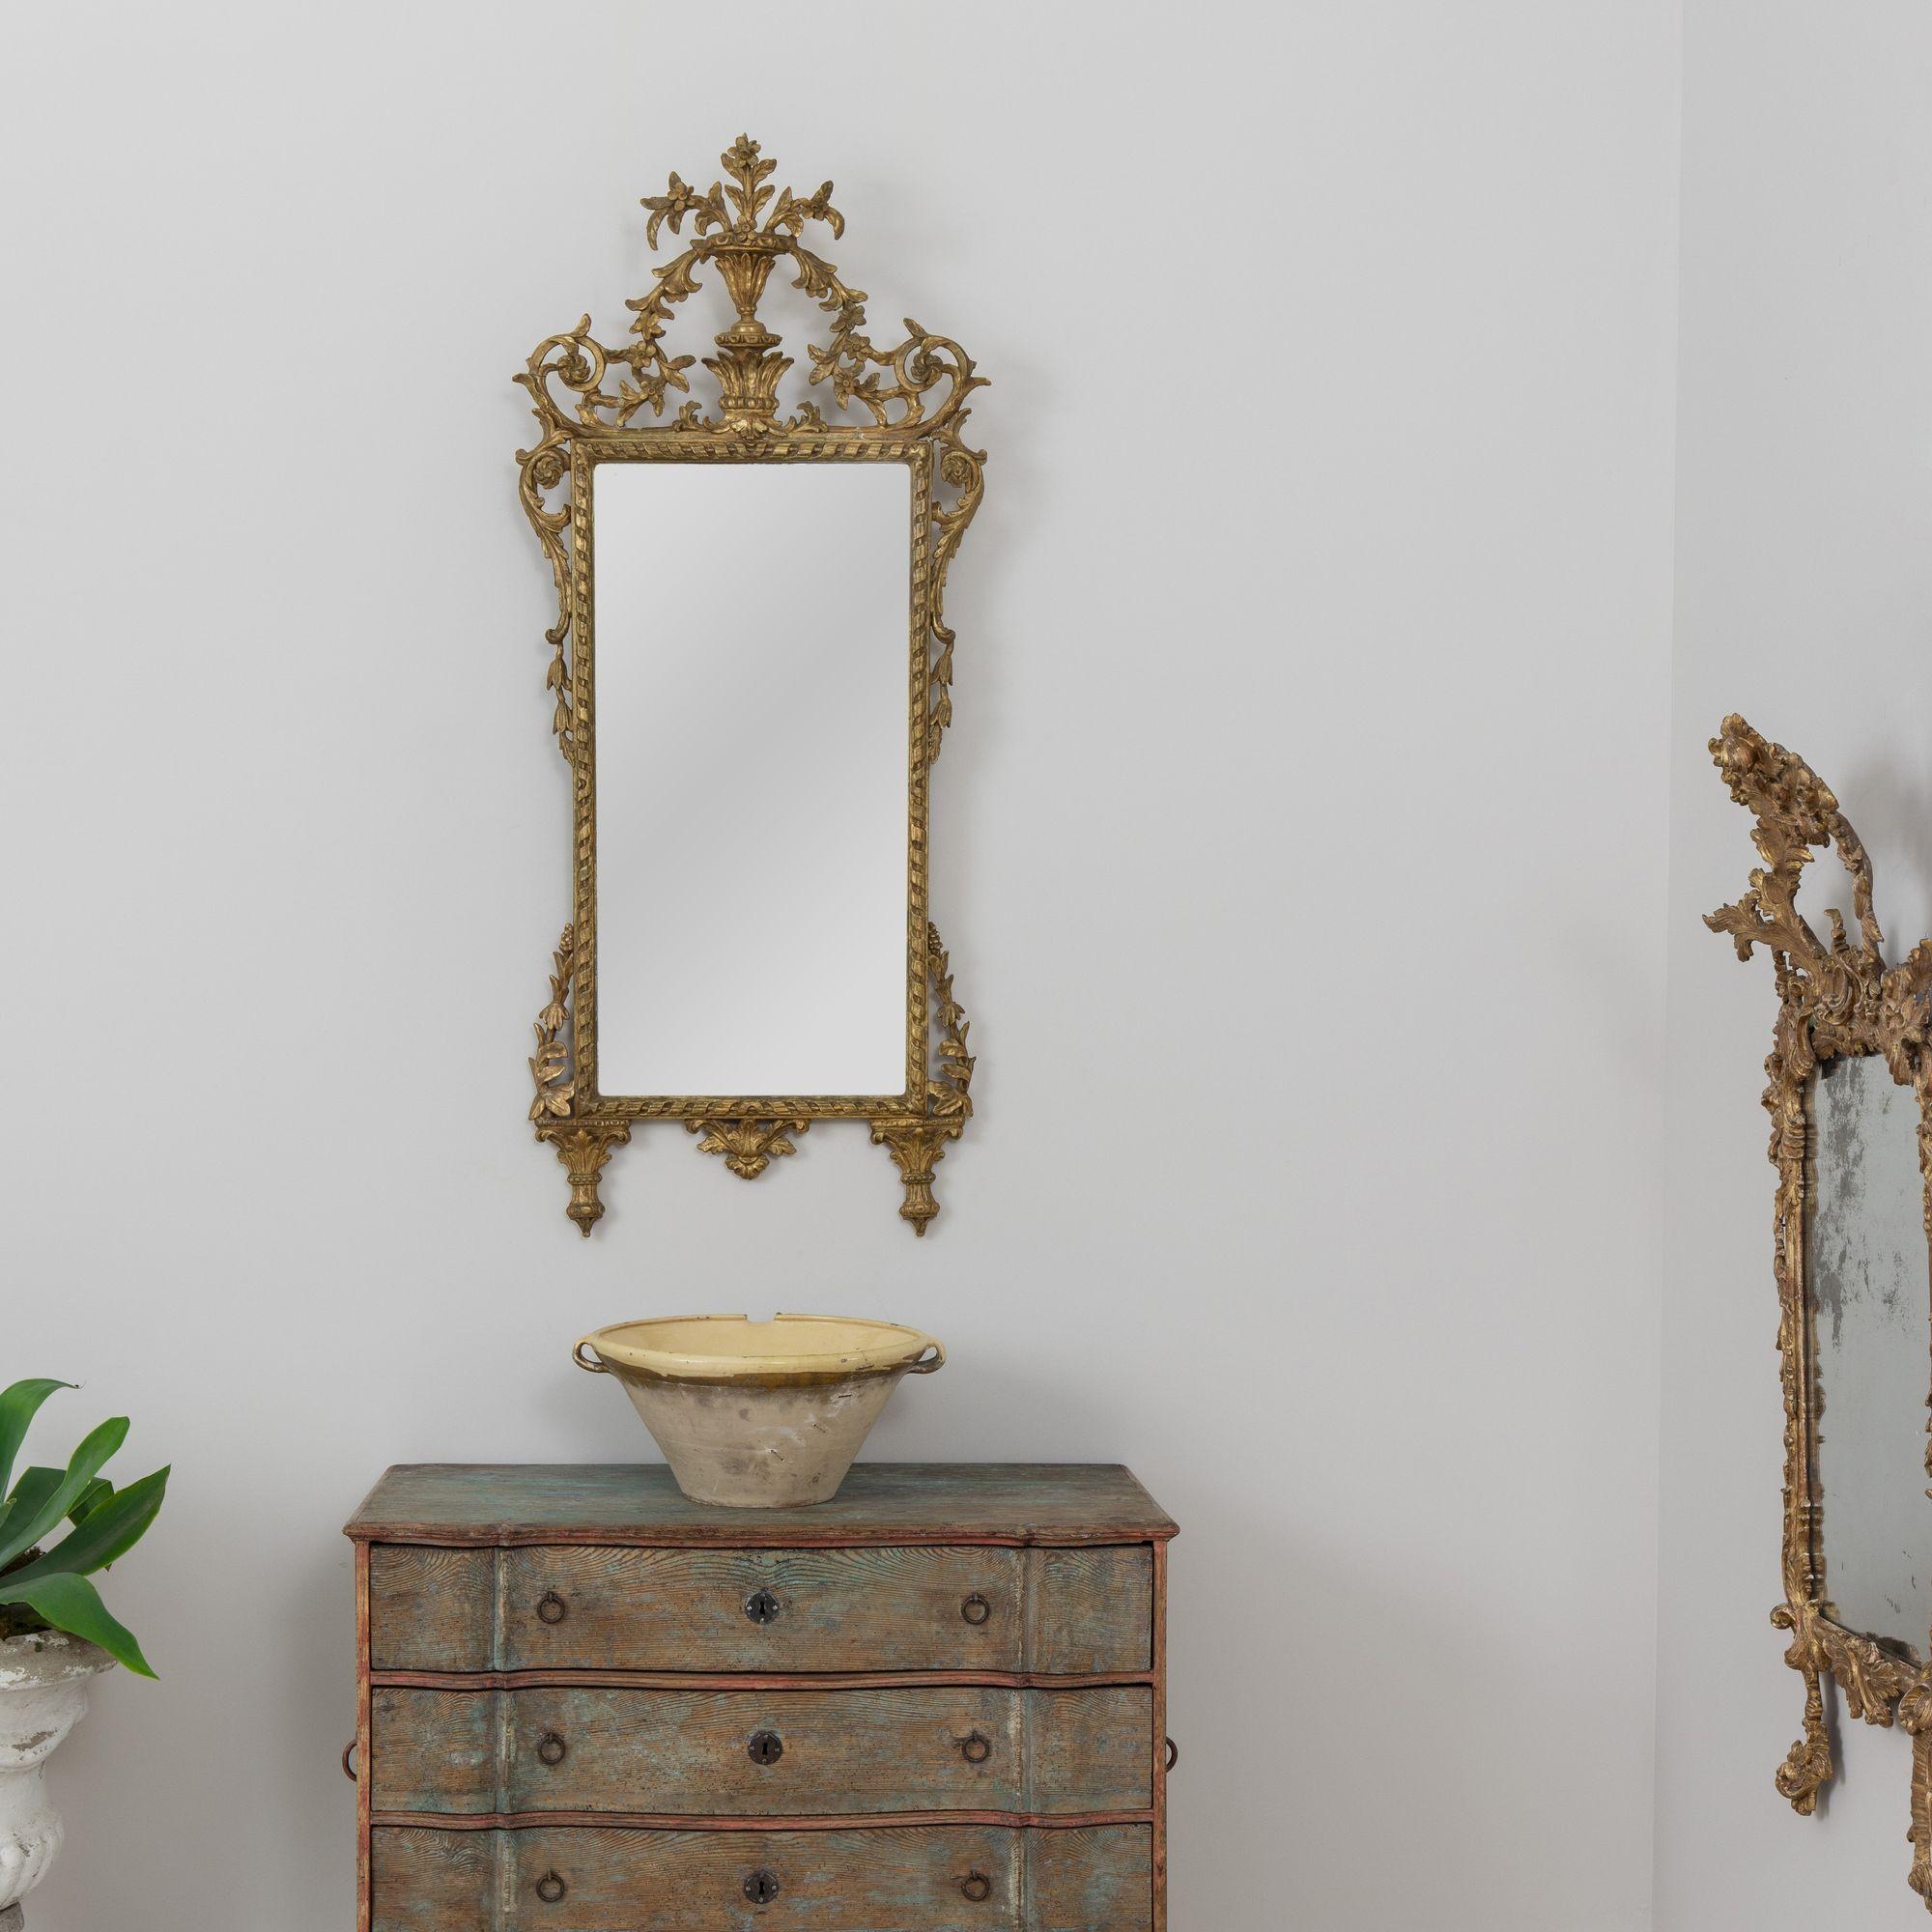 Neoclassical 19th c. Italian Giltwood Mirror with Original Mirror Plate For Sale